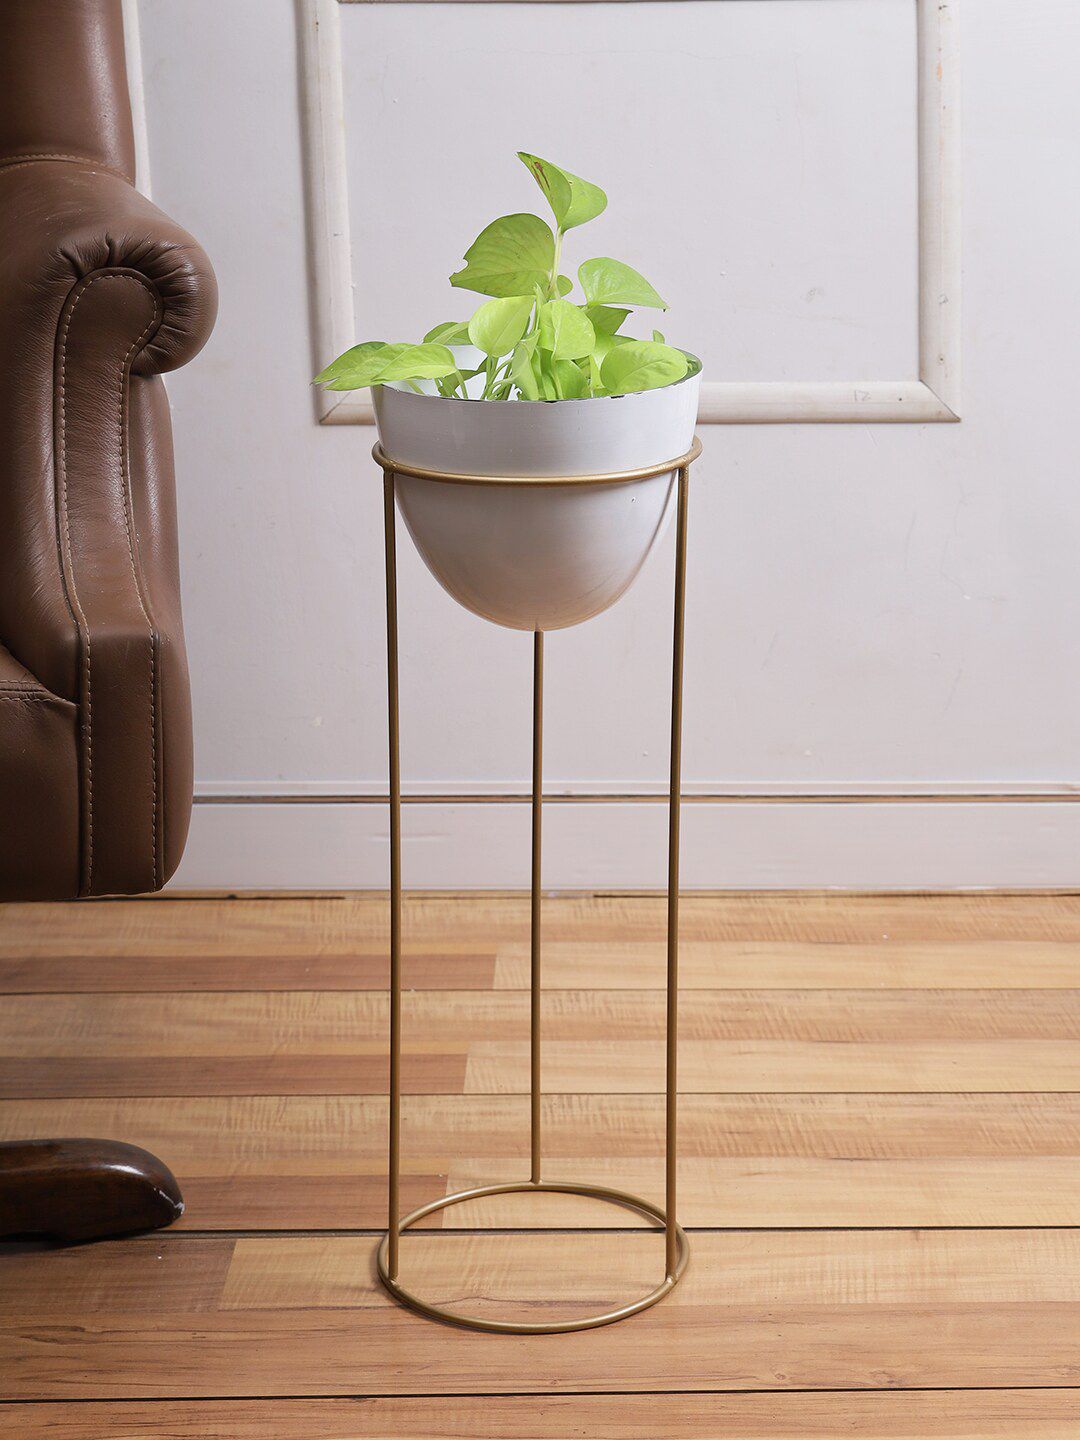 Aapno Rajasthan White Solid Metal Planter Price in India